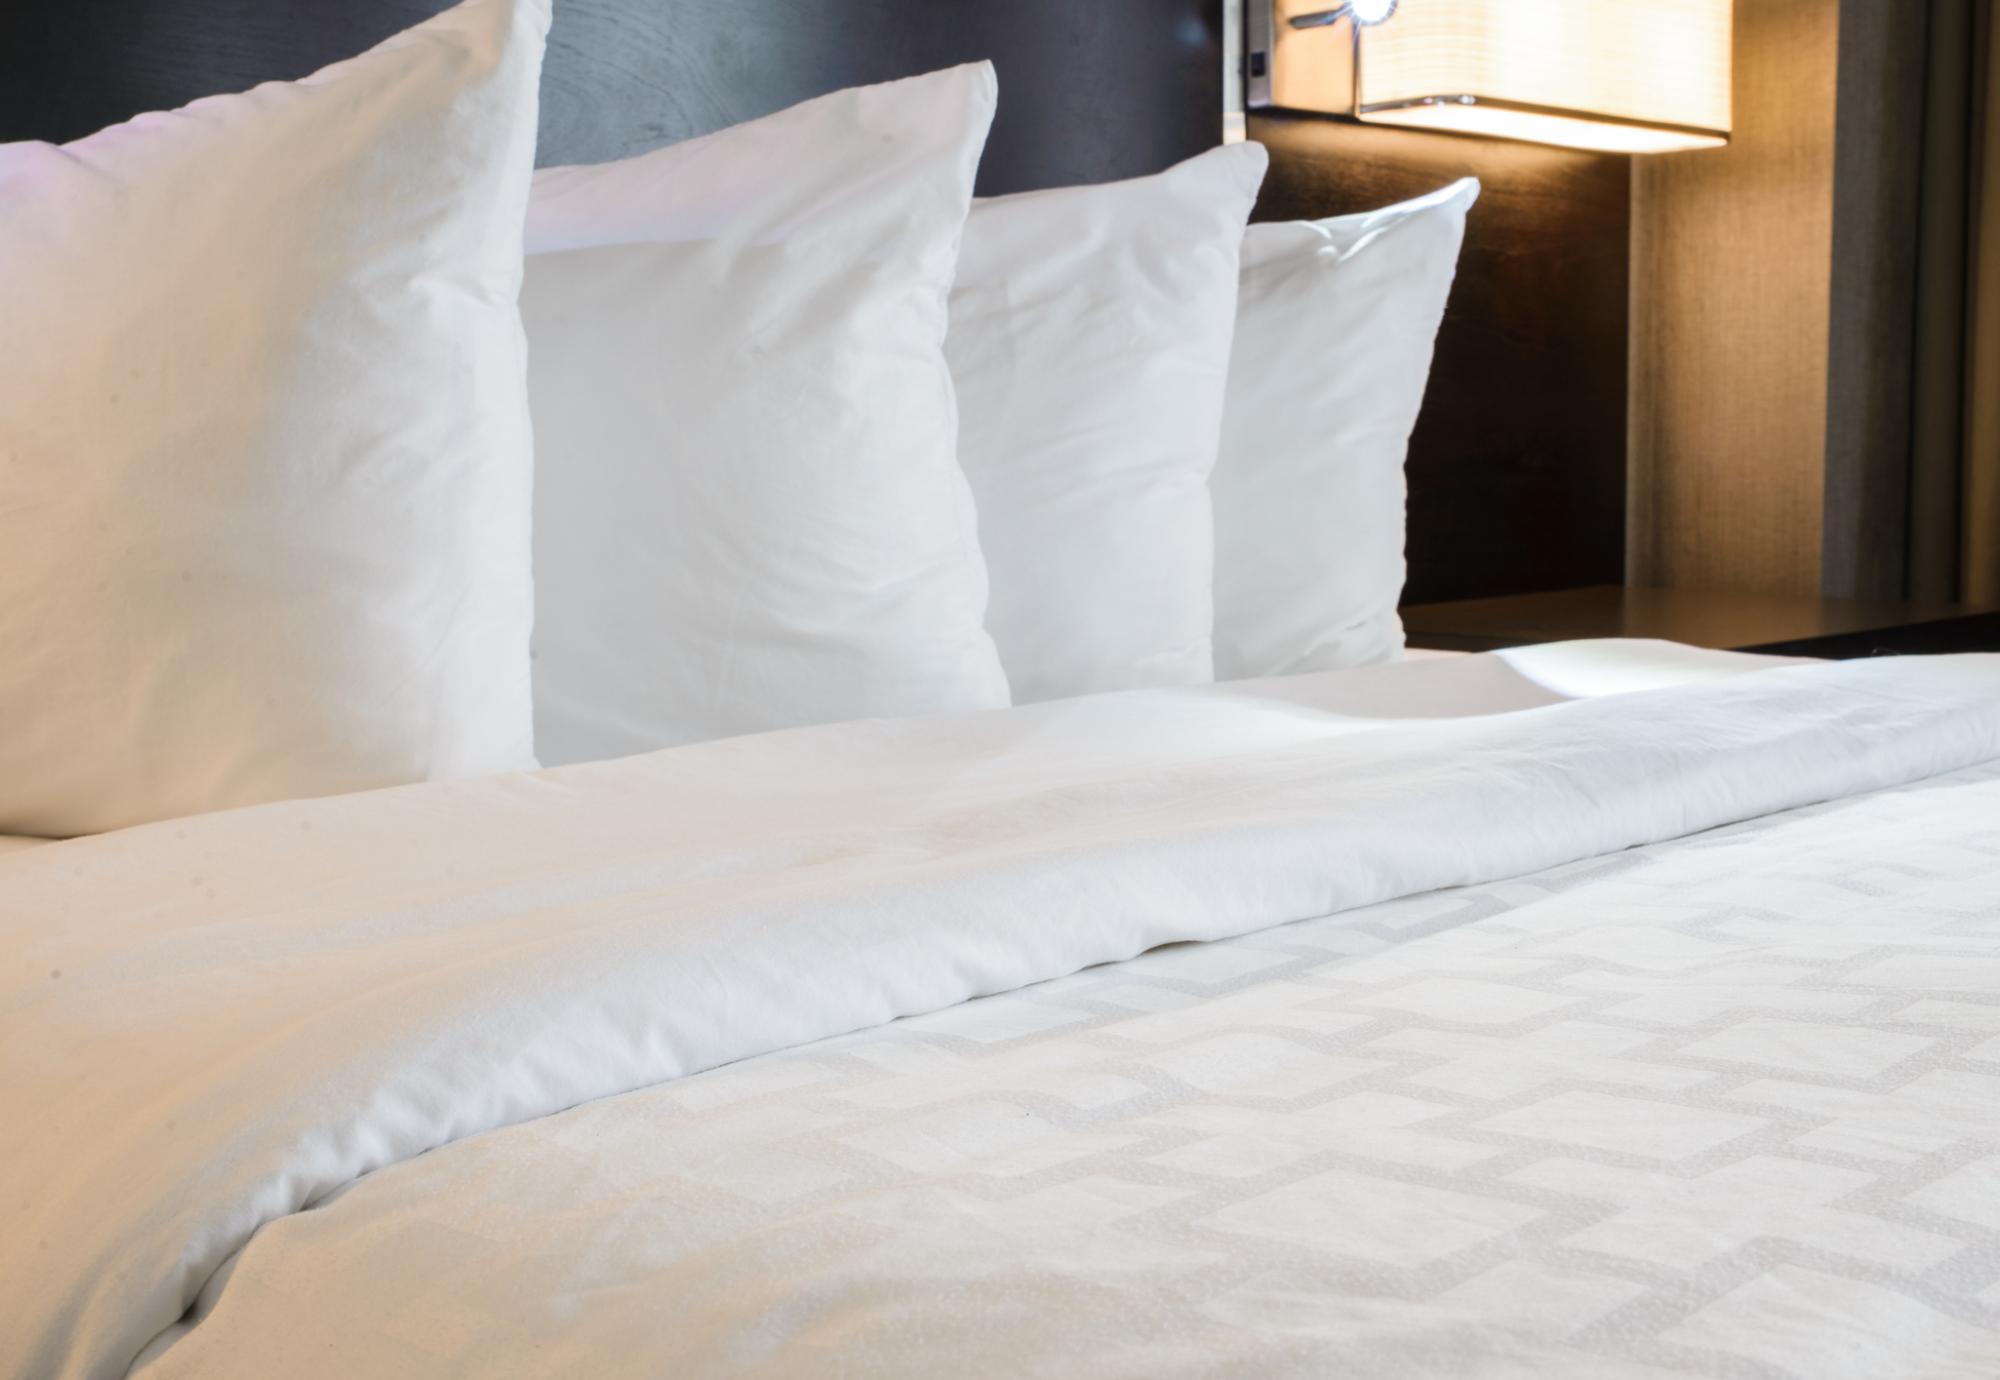 Hotel pillows and bedding